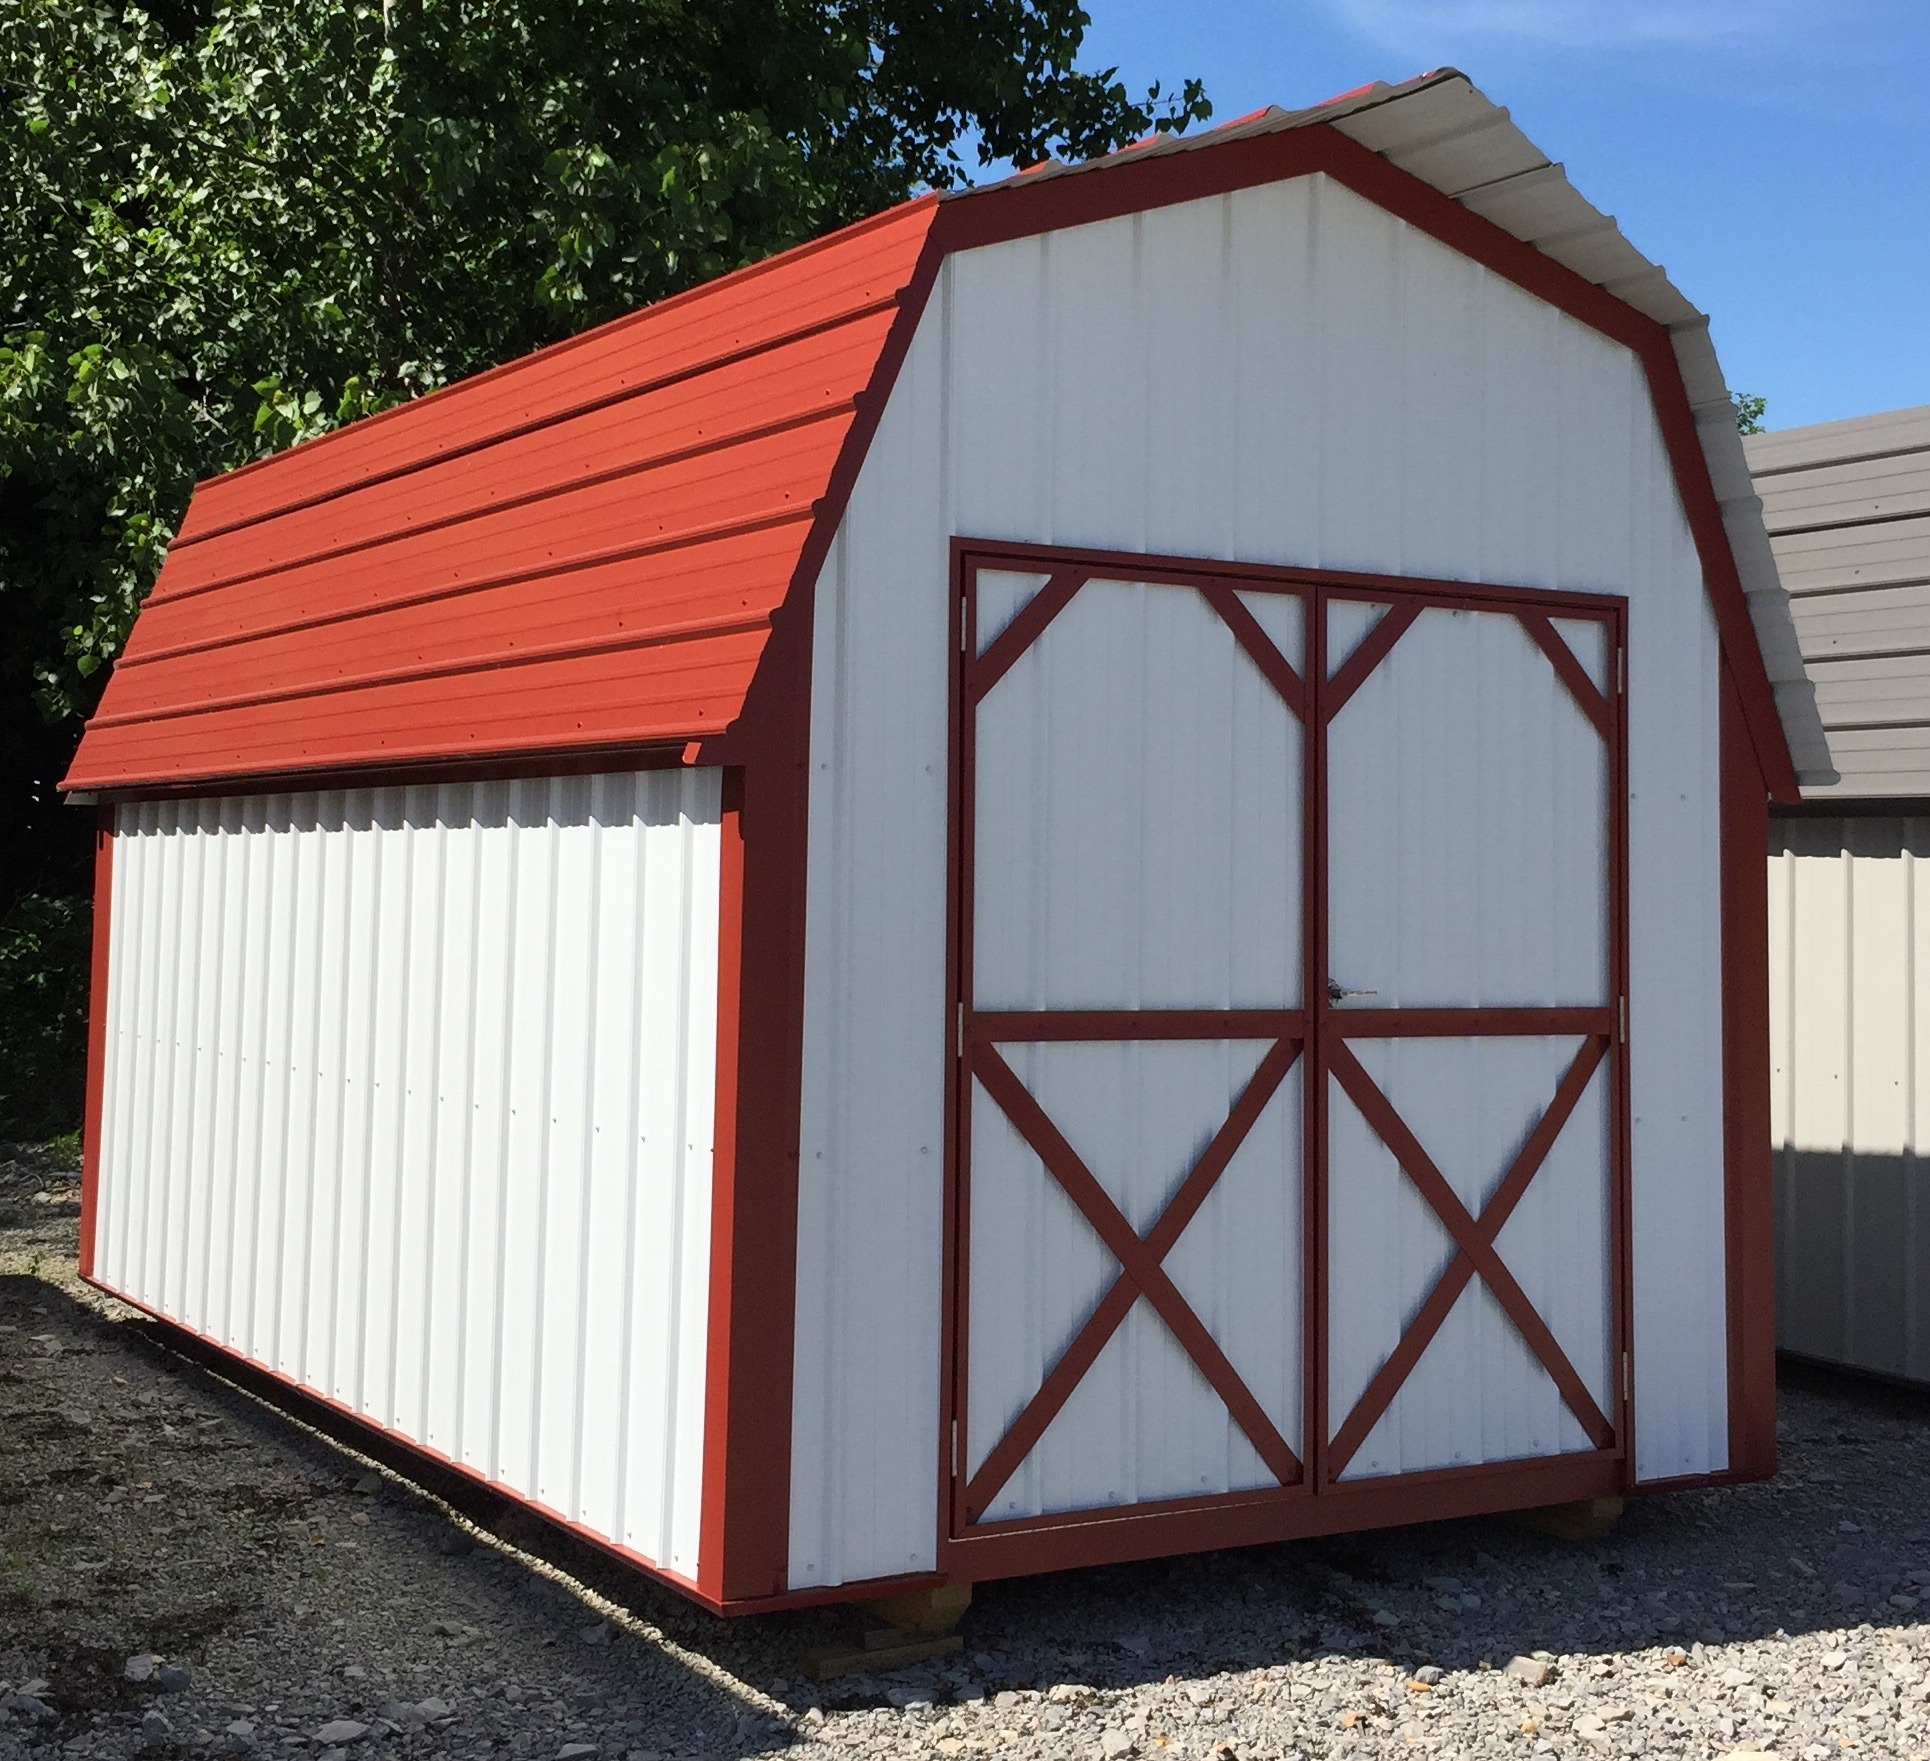 White metal lofted barn with red roof